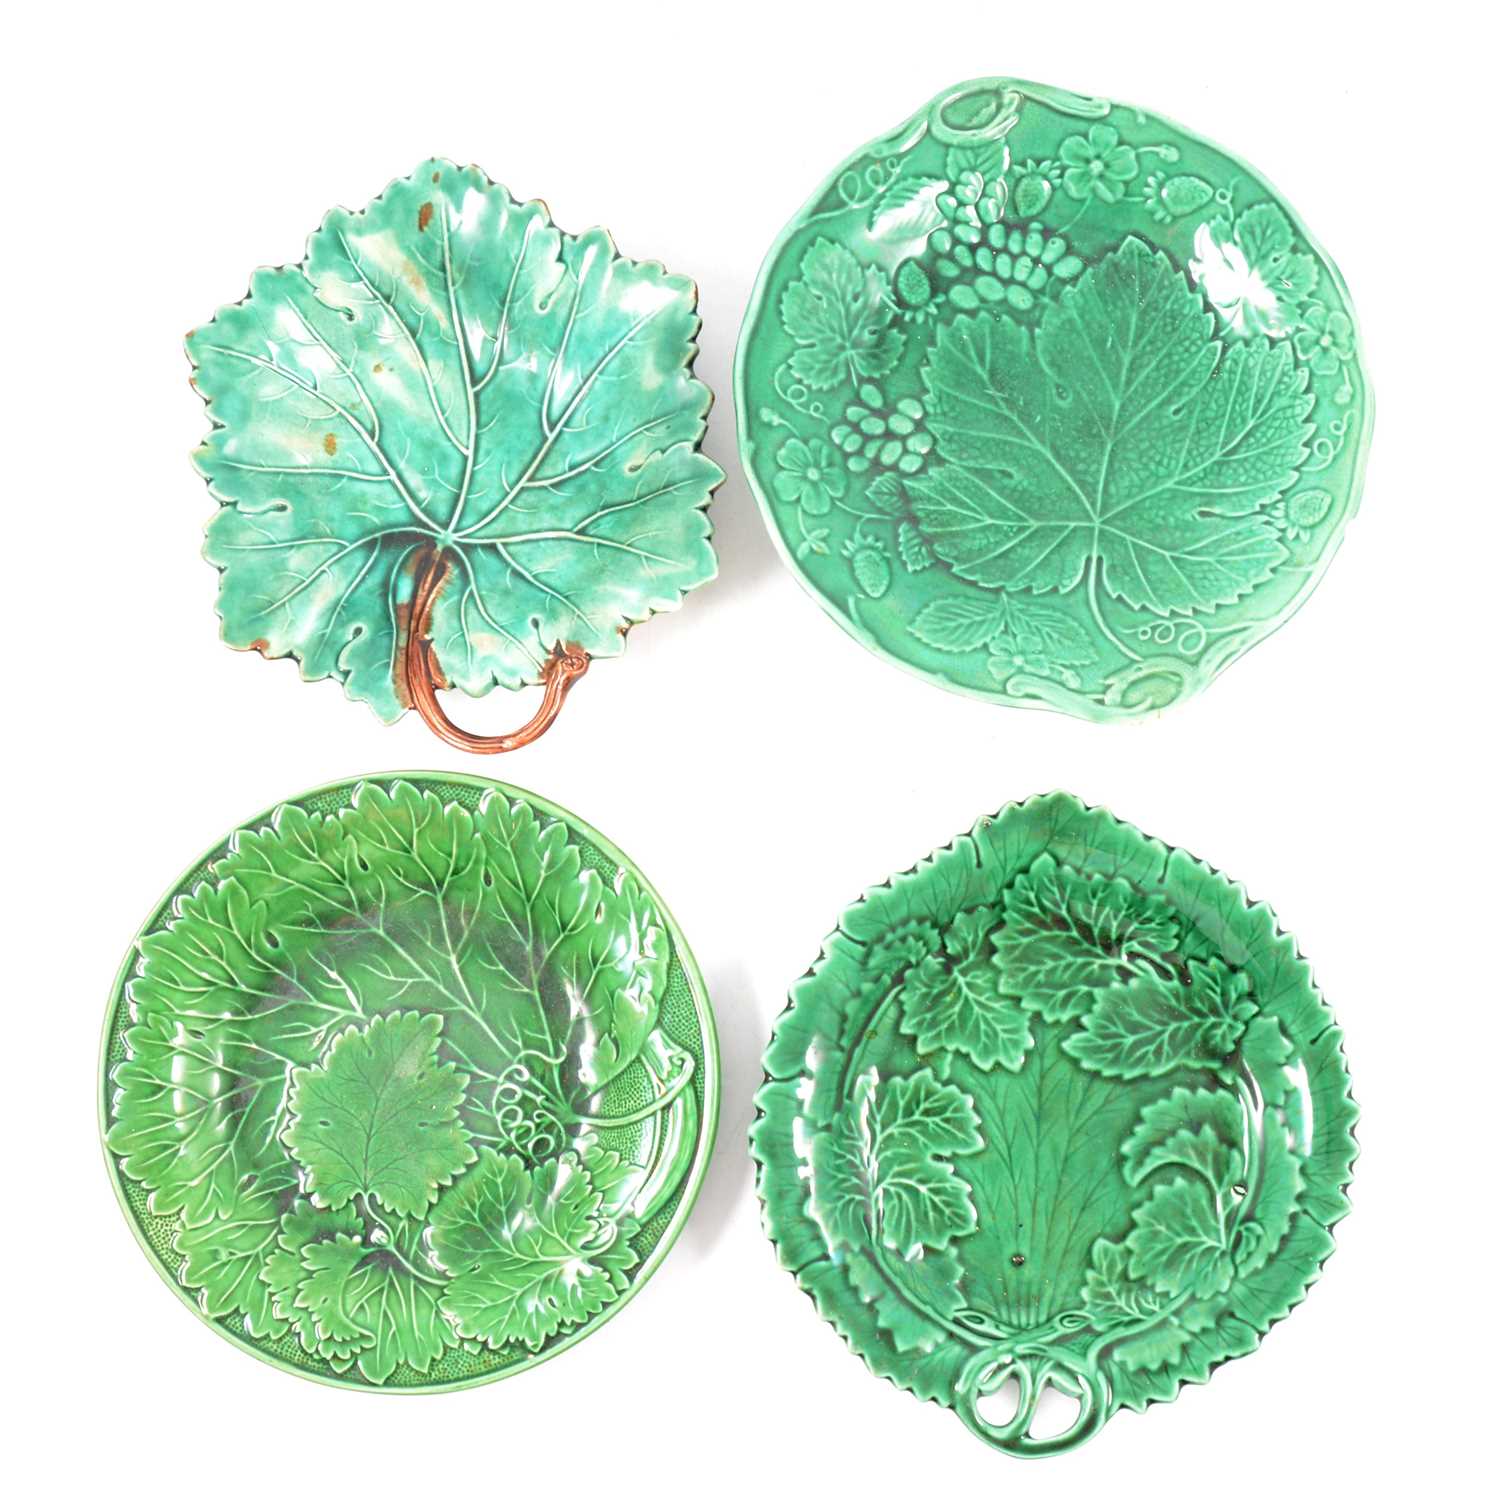 Lot 41 - Collection of Staffordshire green lead-glazed earthenware dessert plates